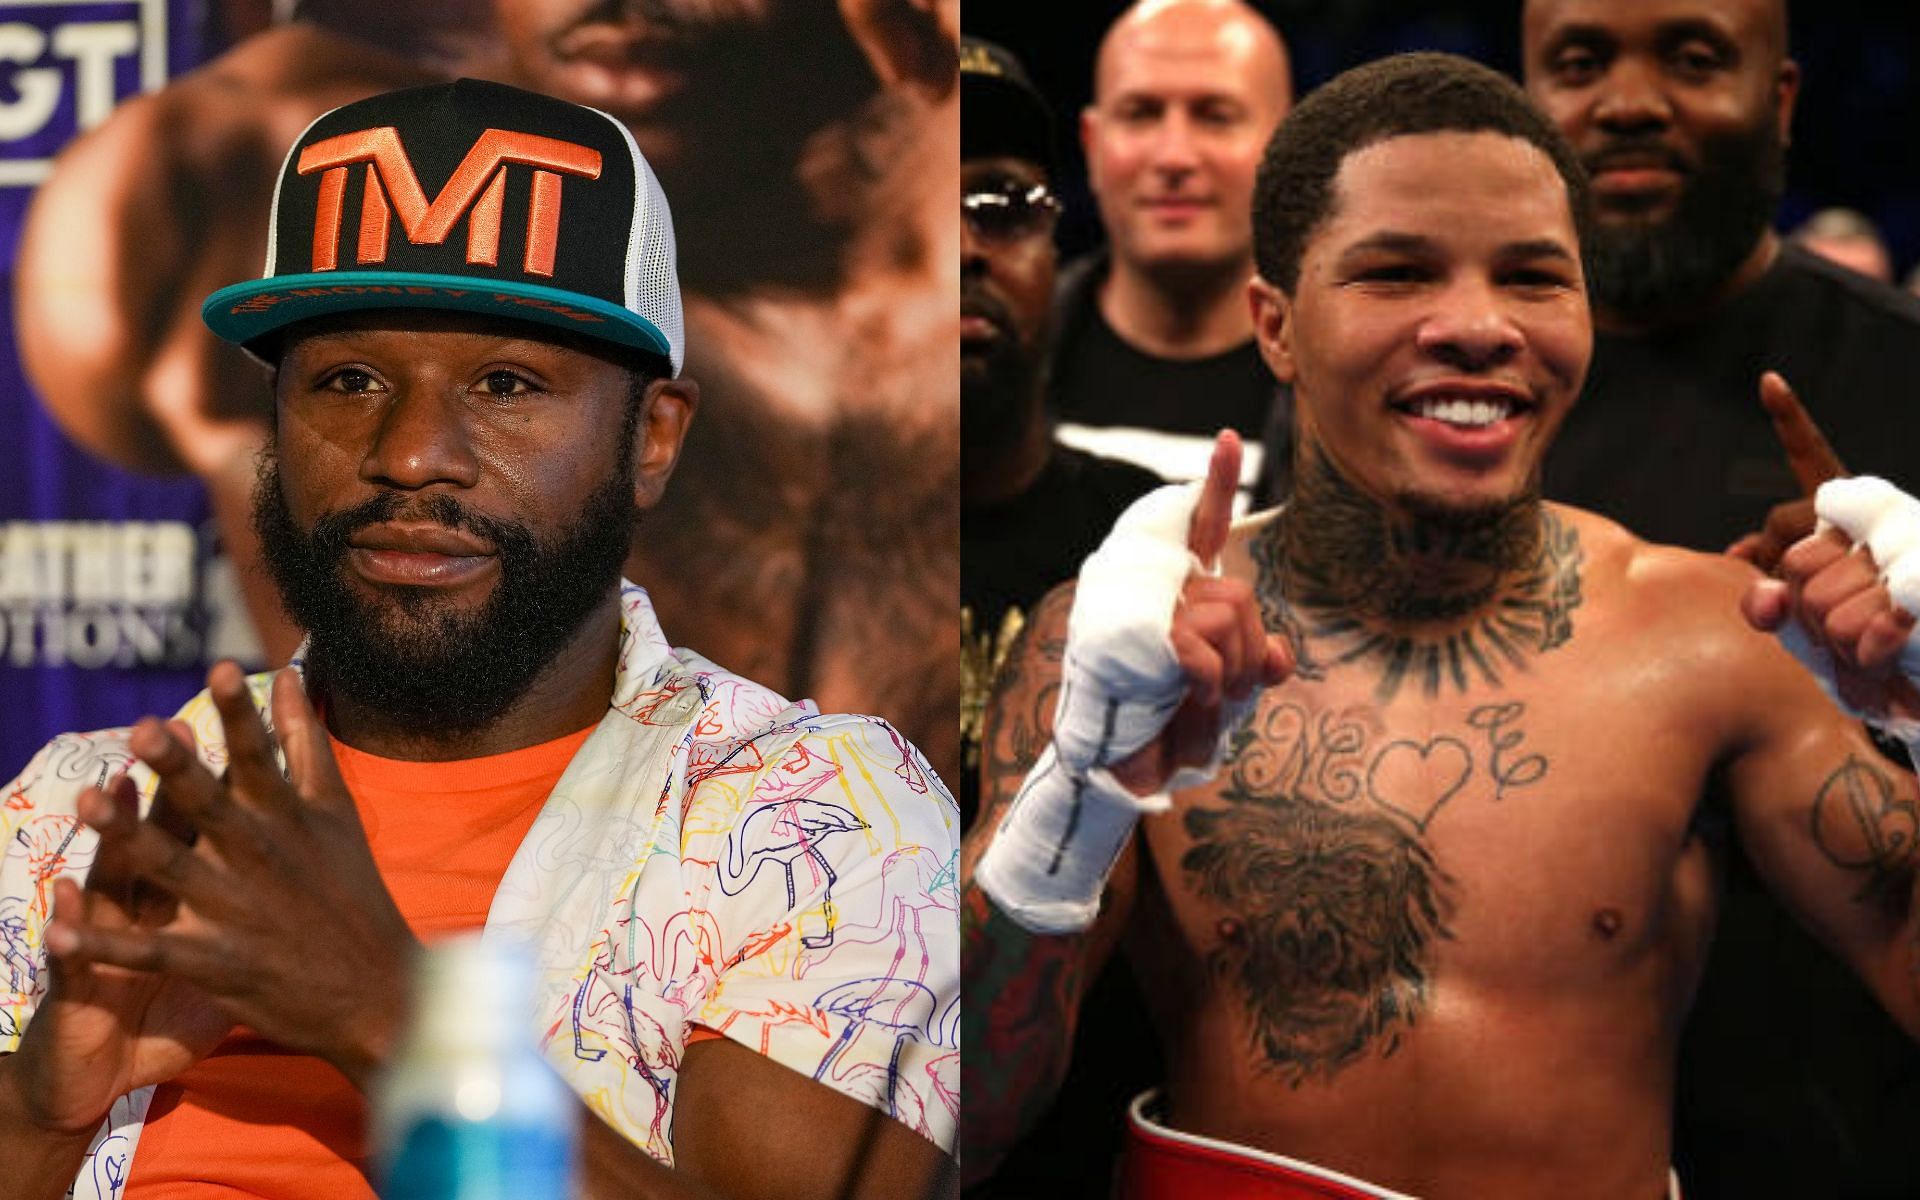 Floyd Mayweather (left) and Gervonta Davis (right) (Image credits Getty)